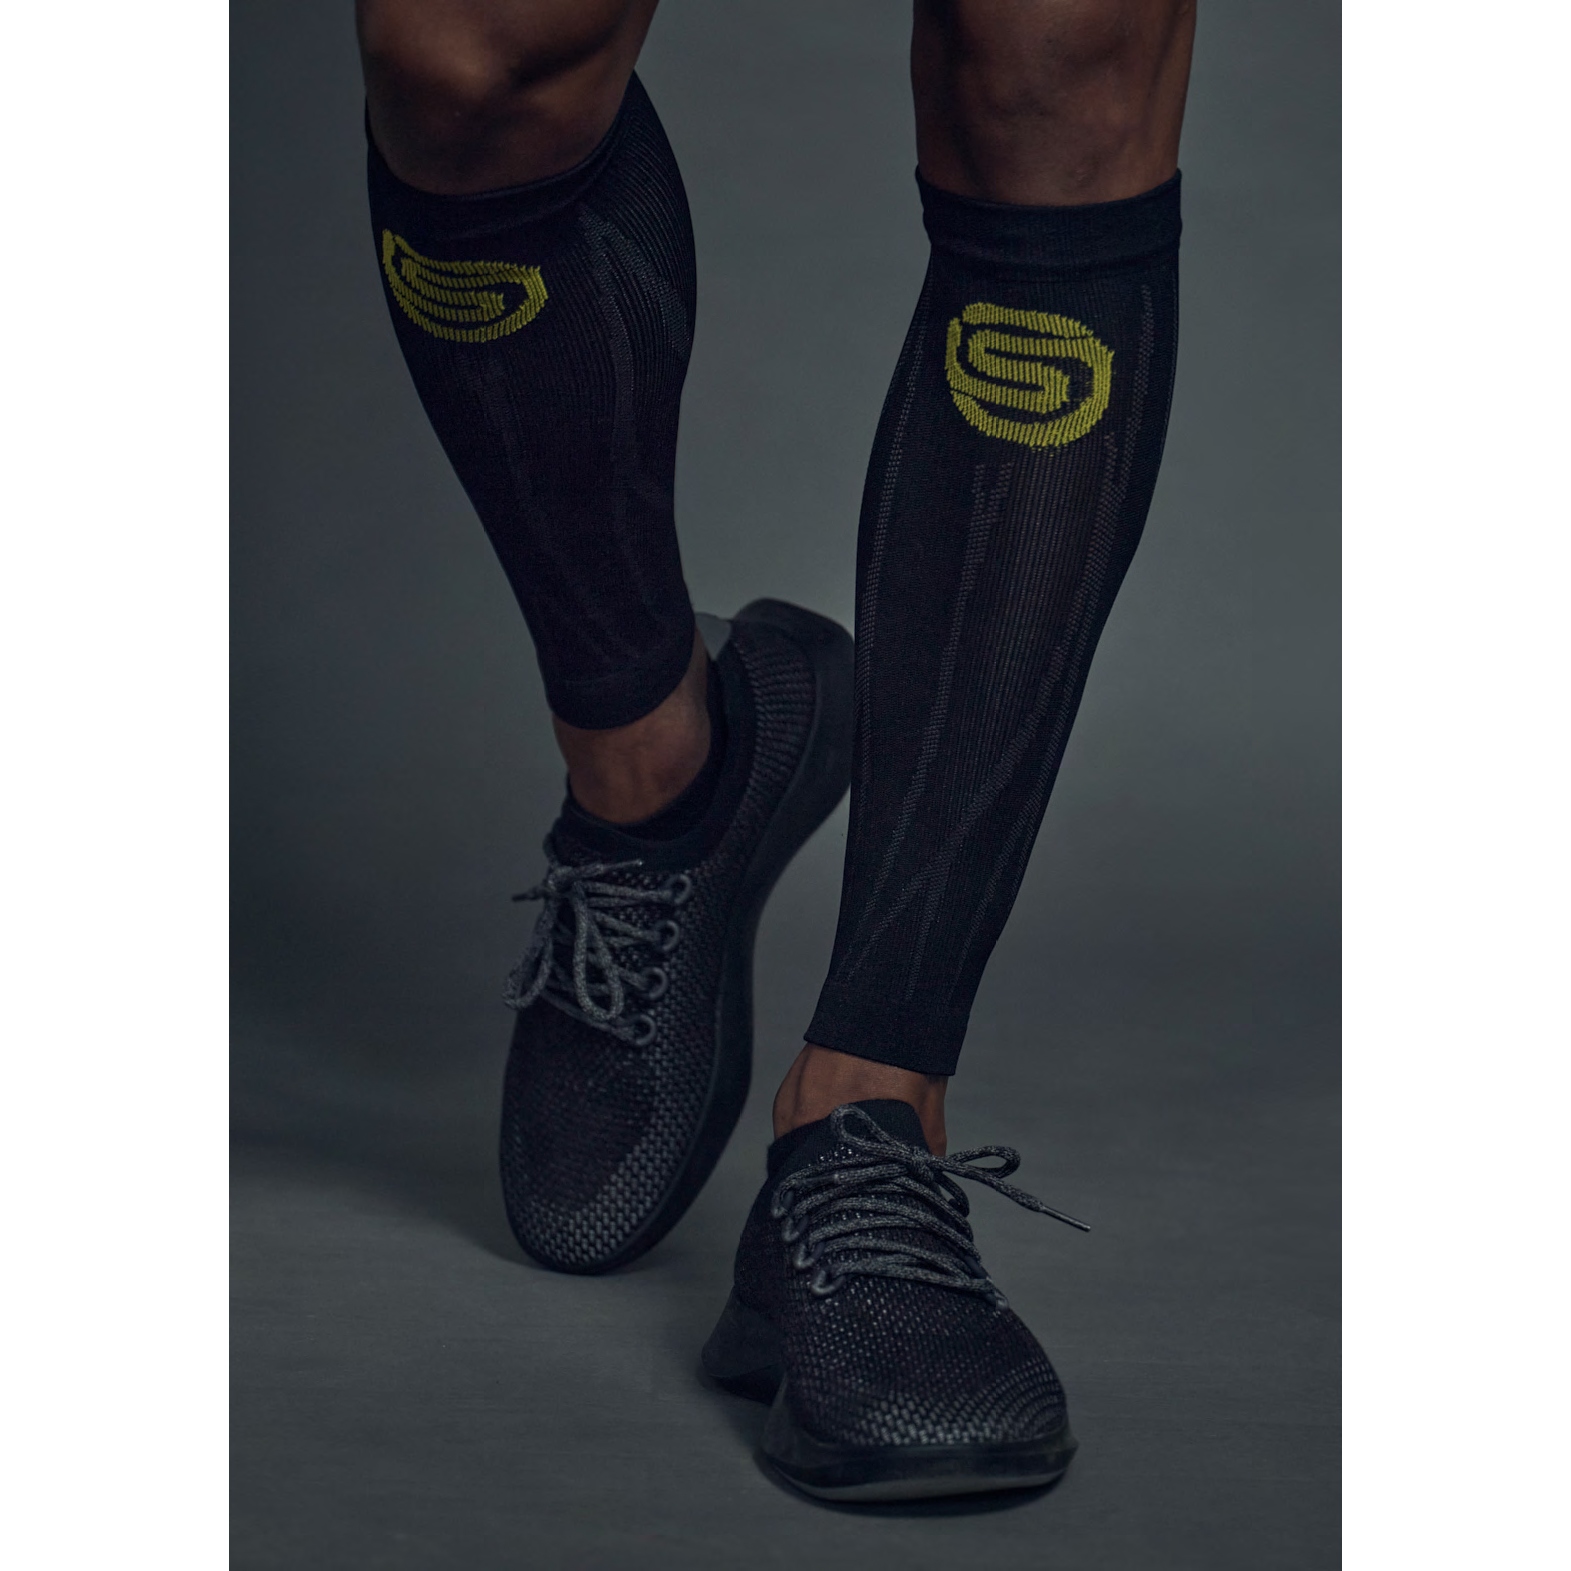 SKINS Compression 3-Series Unisex Seamless Recovery Calf Sleeves - Black